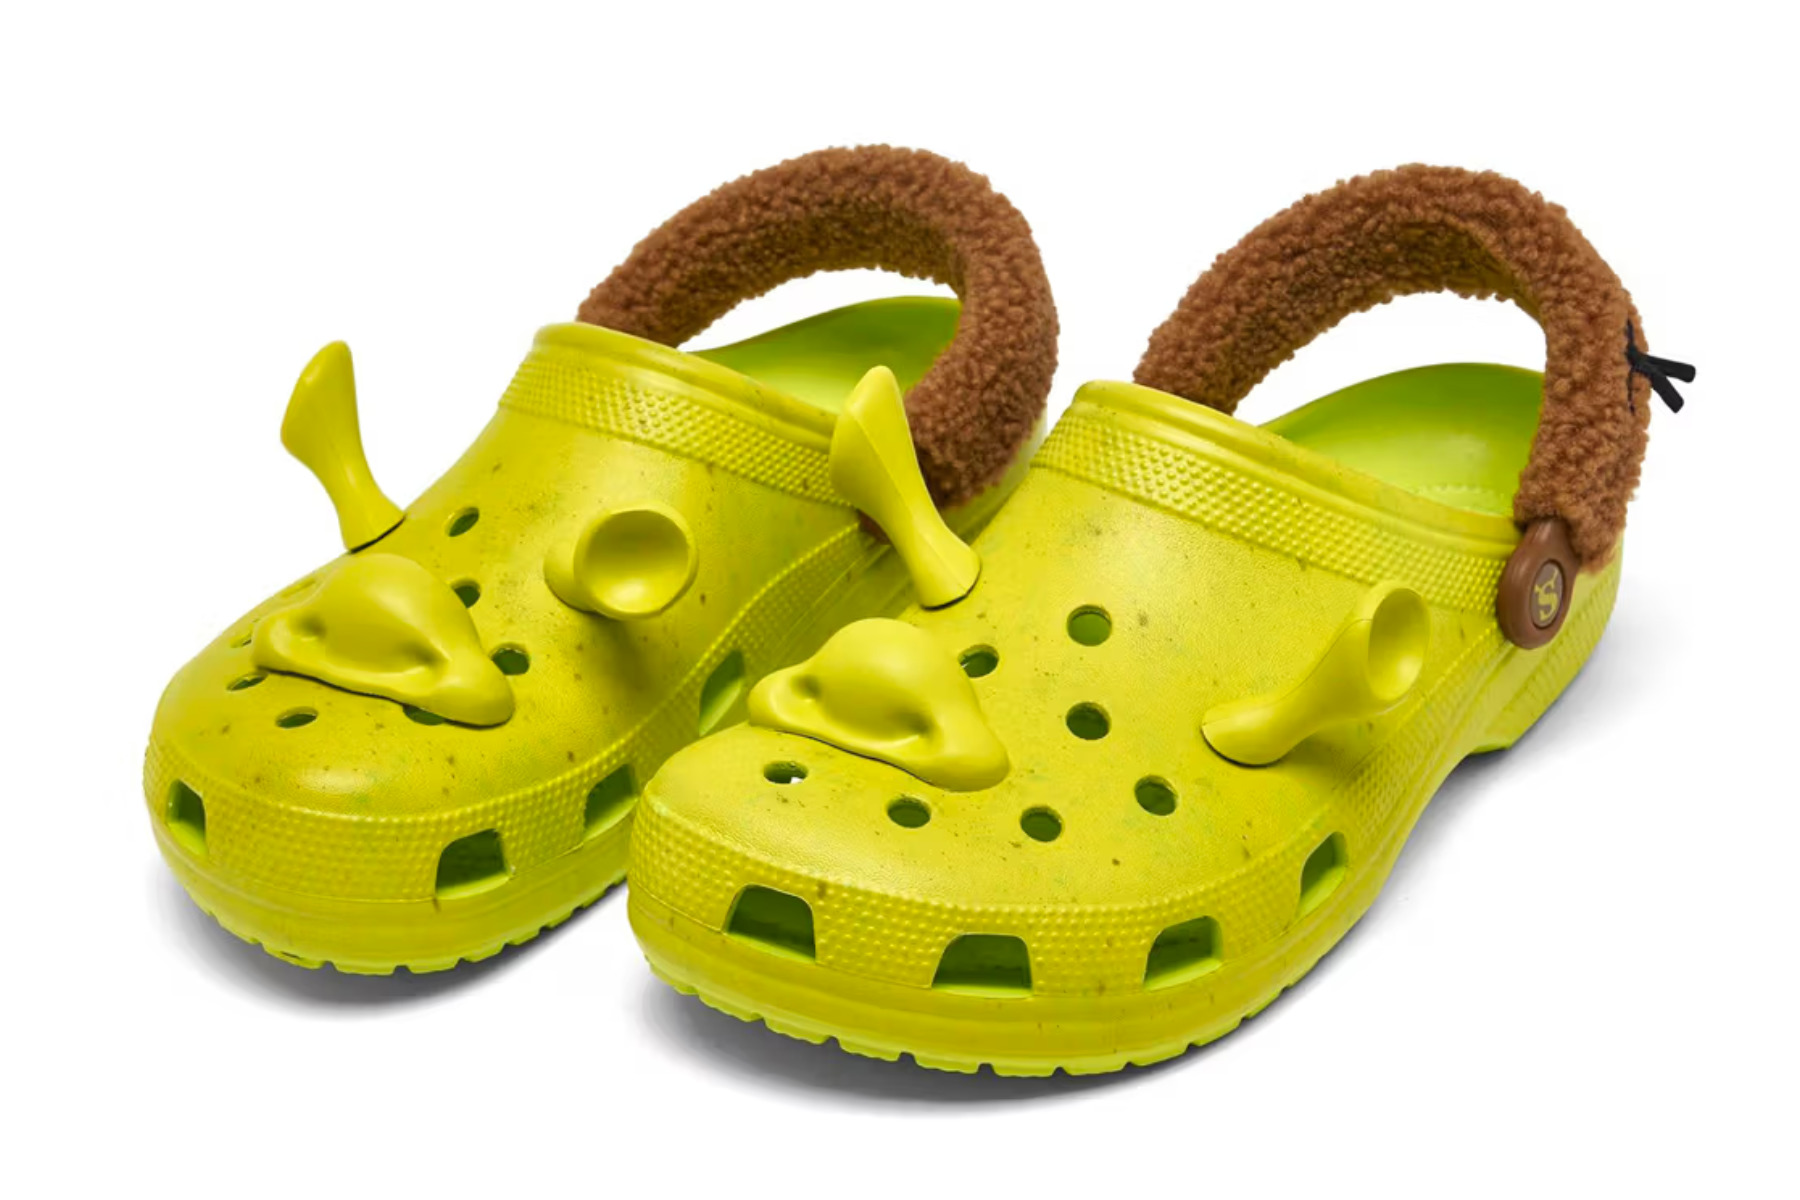 Shrek Crocs: The Slip-Ons You Didn't Know You Needed